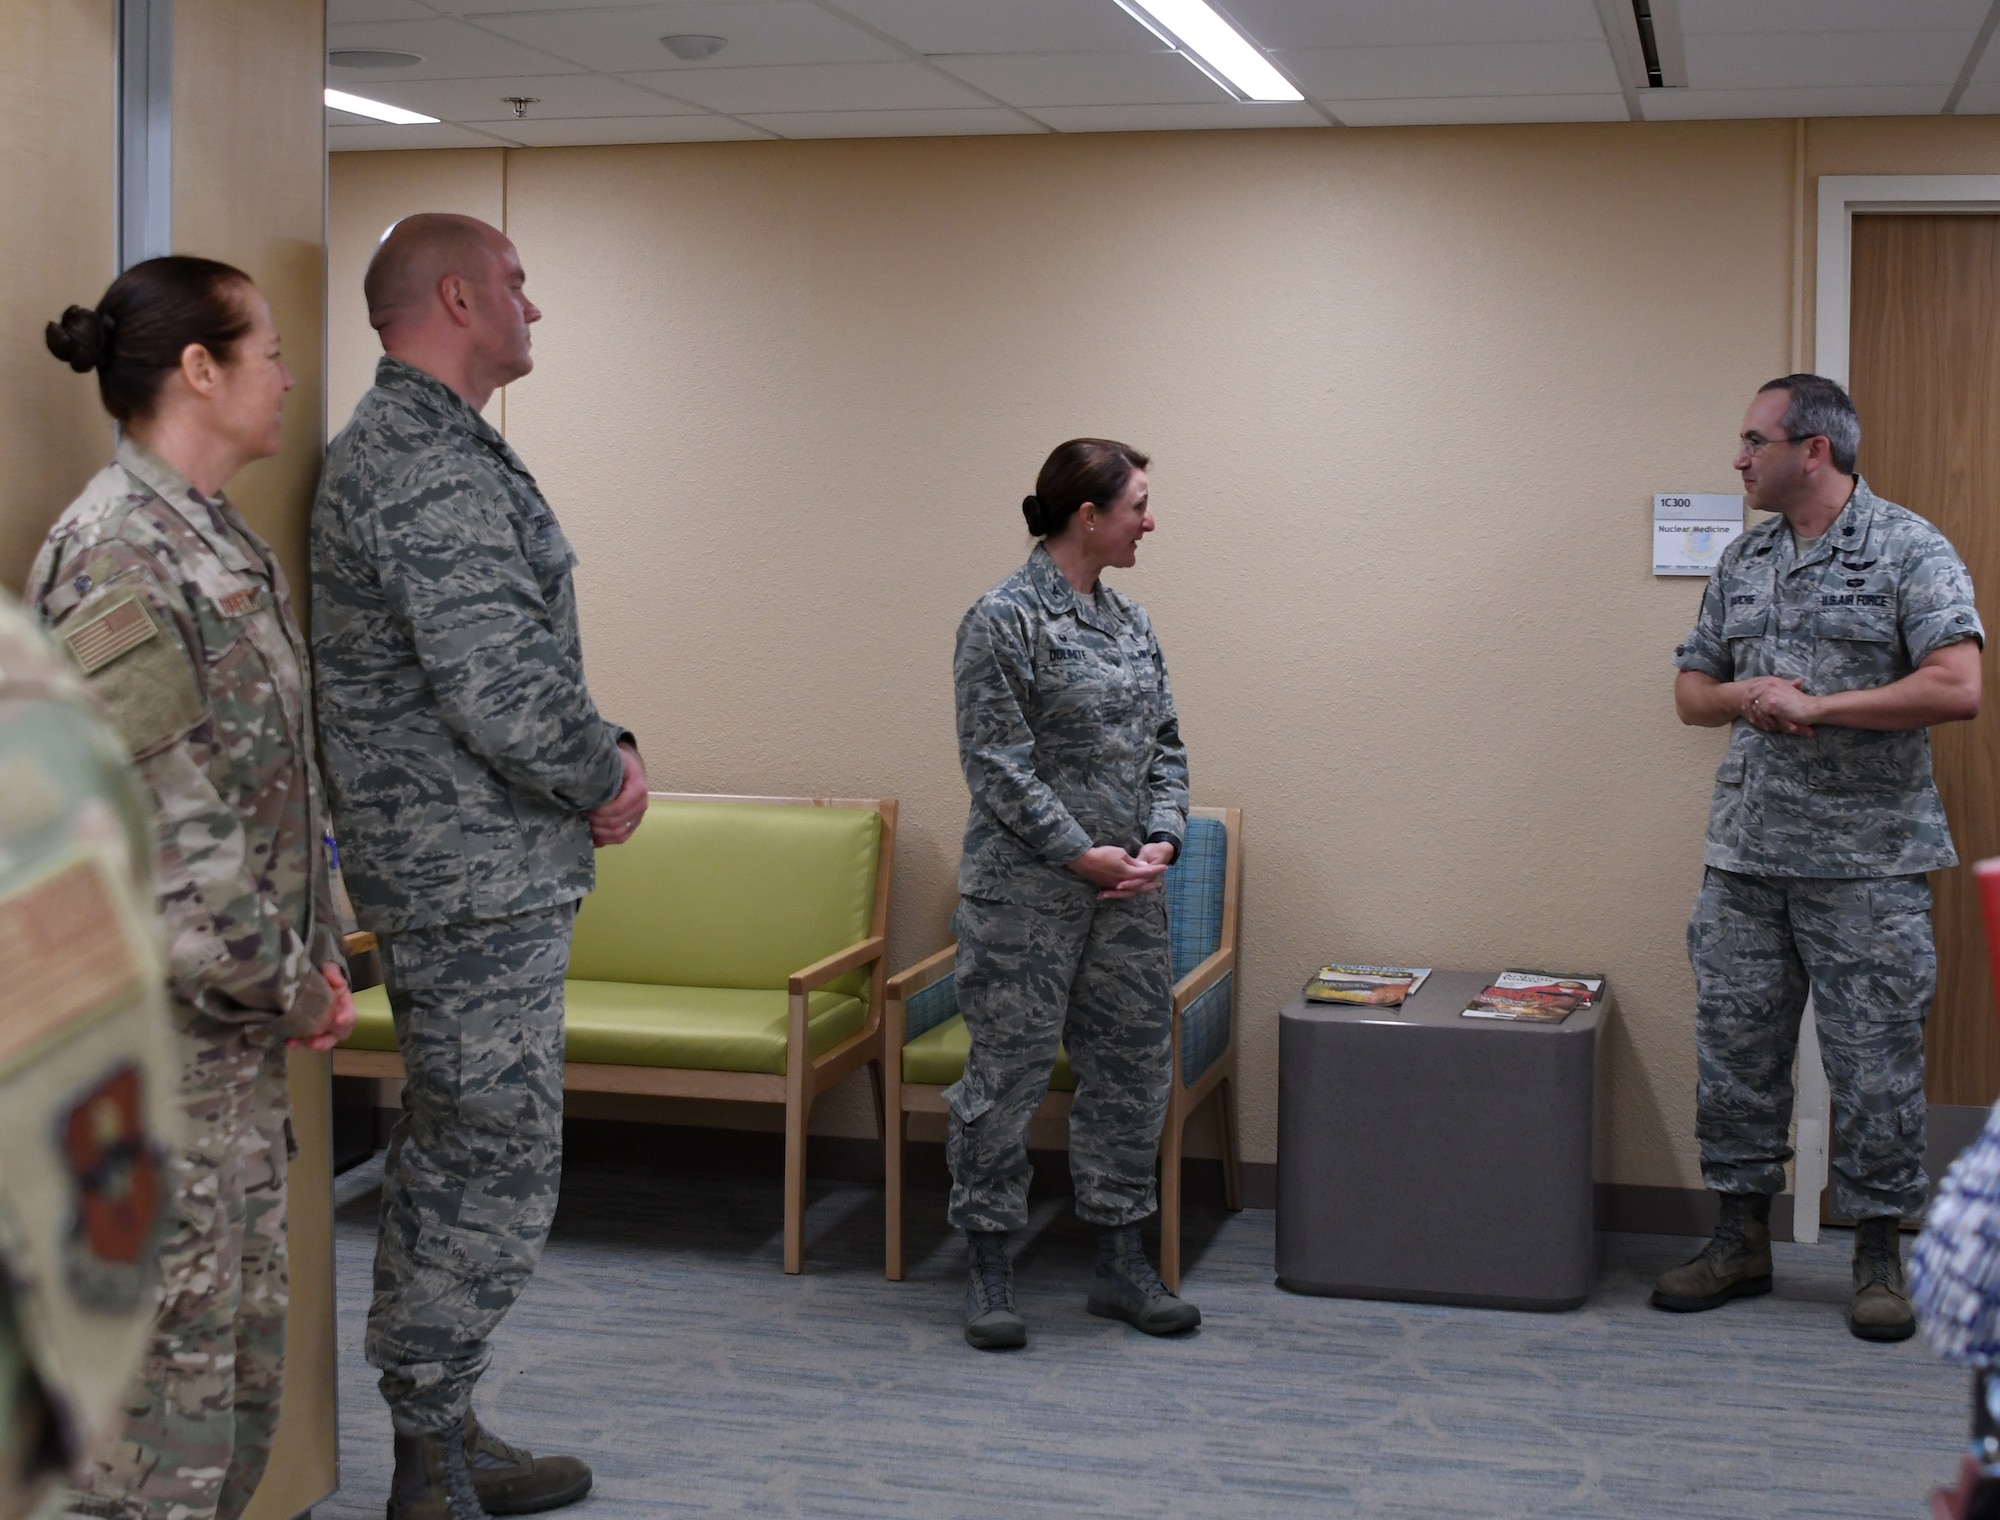 U.S. Air Force Lt. Col. Matthew Barchie, 81st Diagnostic and Therapeutics Squadron diagnostic imaging medical director, makes remarks before the ribbon cutting ceremony inside the Keesler Medical Center on Keesler Air Force Base, Mississippi, April 10, 2019. The Radiology Oncology Clinic received a Positron Emission Tomography and Computer Tomography scanner as well as an Interventional Radiology Program, which will improve patient care. (U.S. Air Force photo by Senior Airman Suzie Plotnikov)